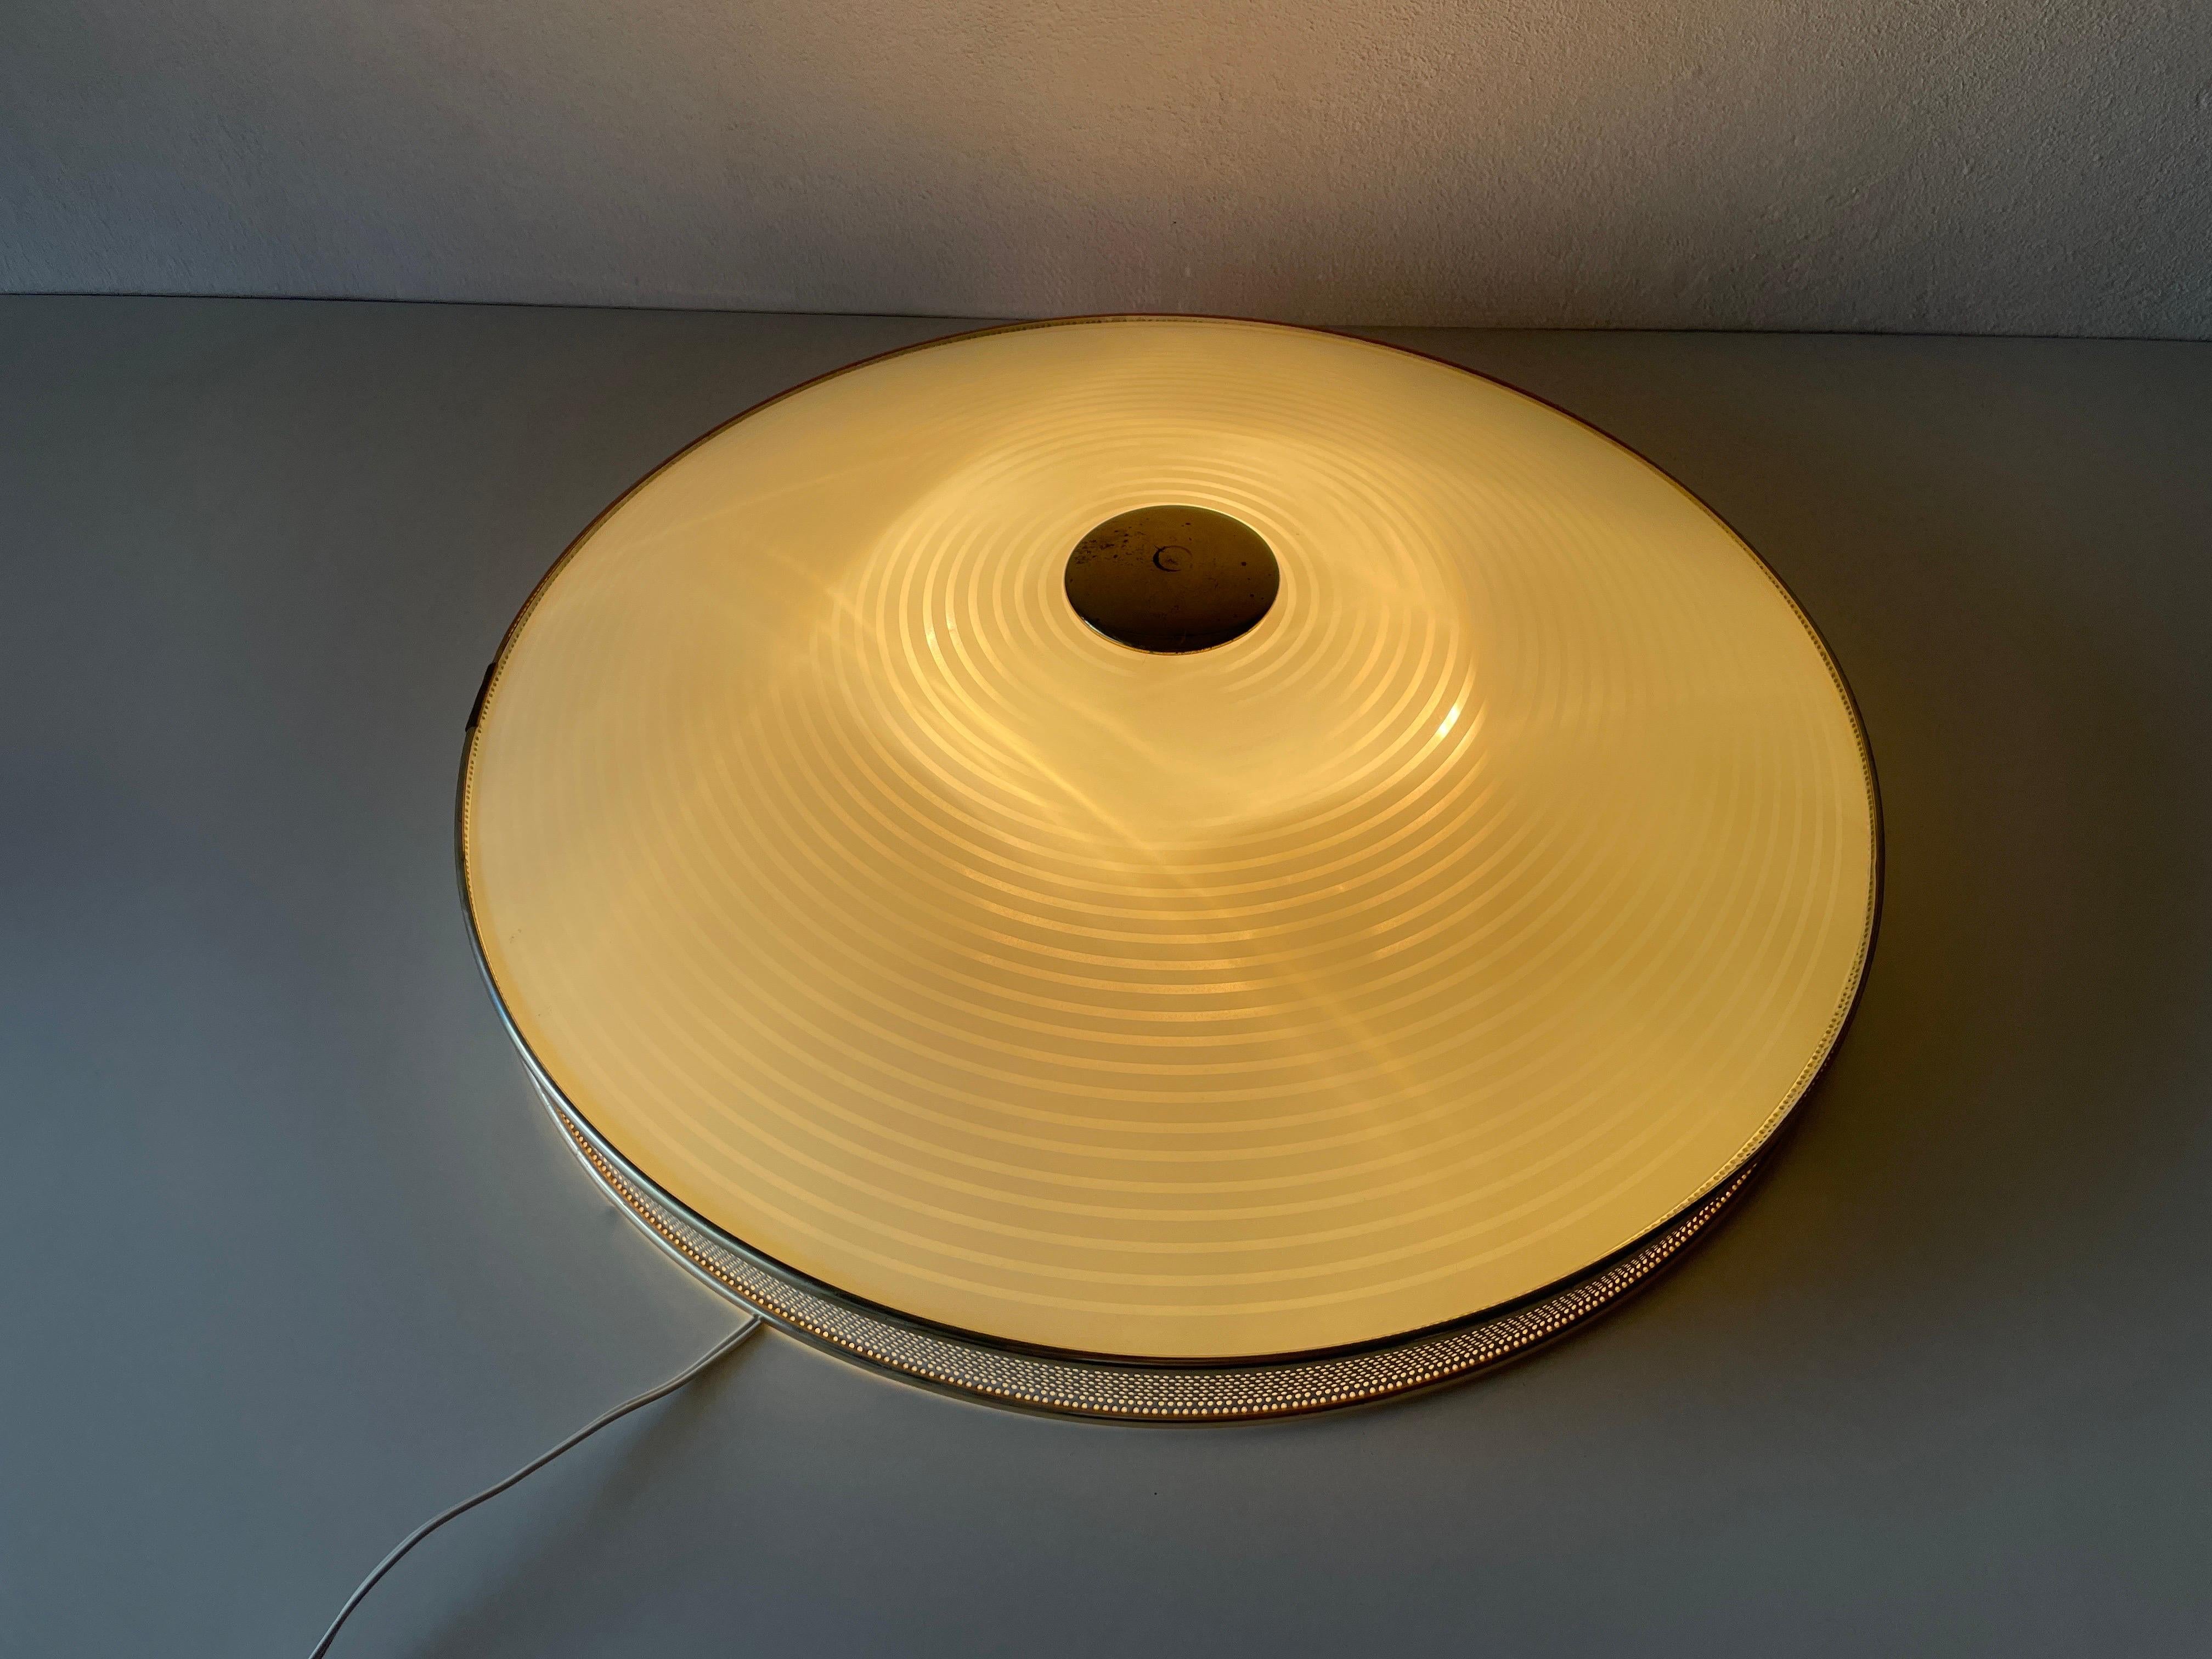 Ufo Design Glass Metal Flush Mount Ceiling Lamp by Hillebrand, 1950s, Germany For Sale 9